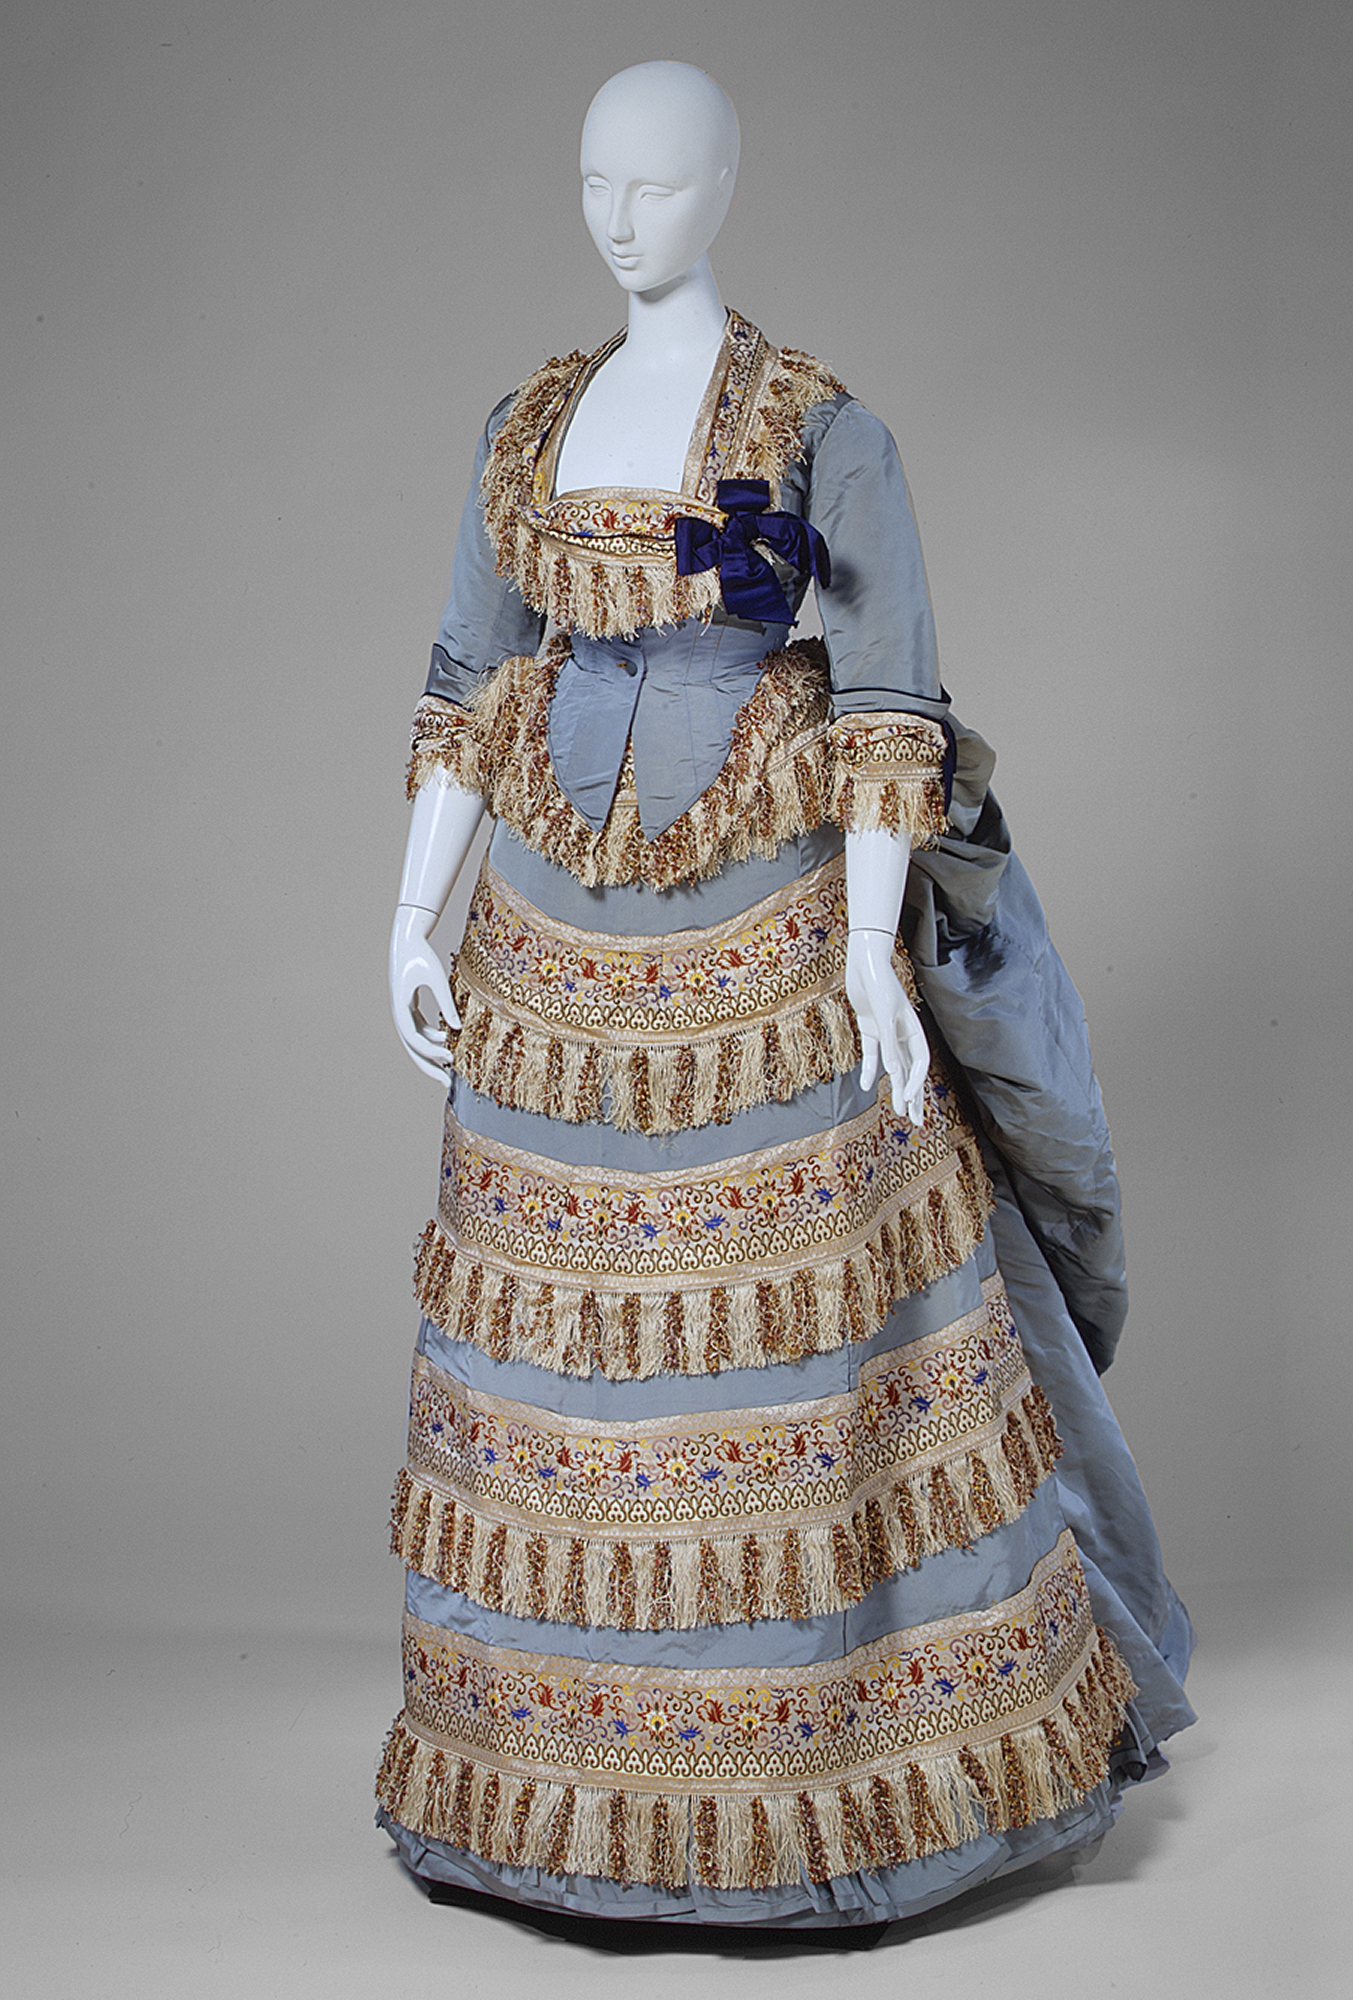 Worth evening / ball gown of Empress Eugenie of France, one of his earliest  patrons (1866-67) : r/fashionhistory